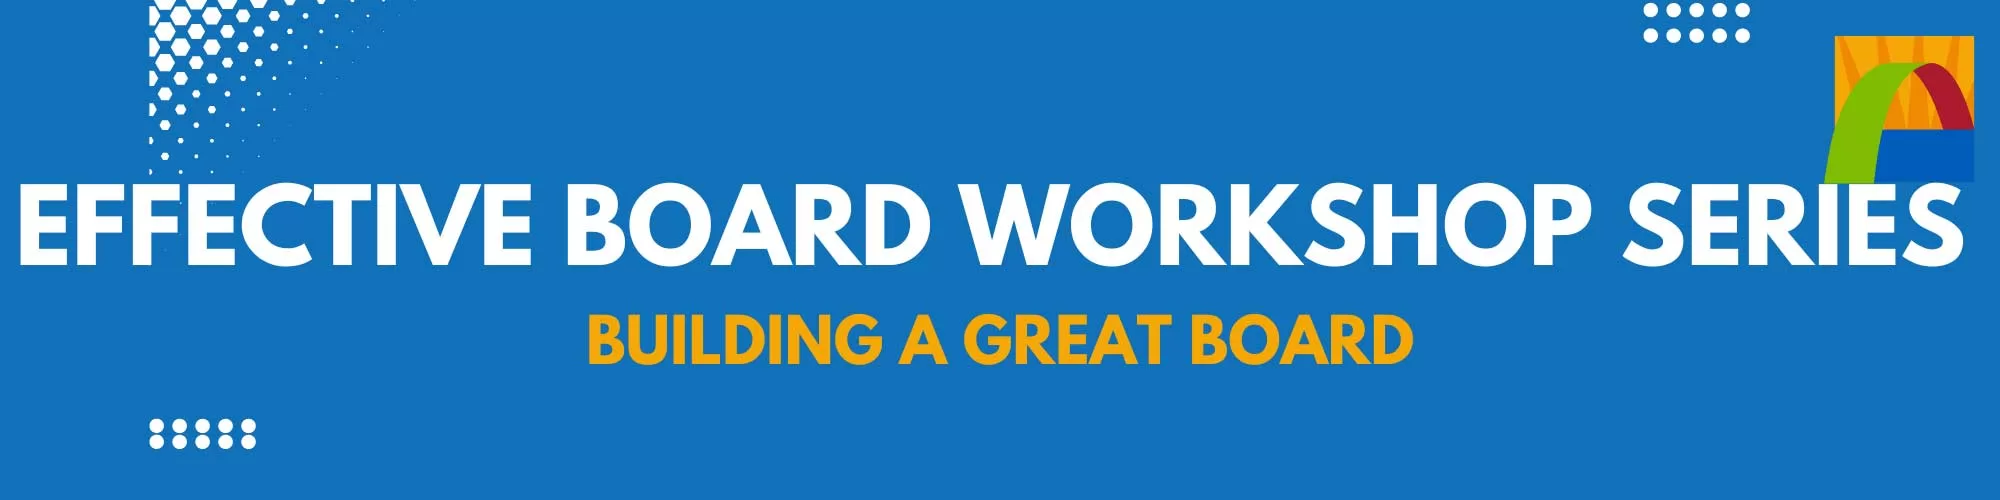 Blue banner image with Jericho Road Pasadena logo and the text: Effective Board Workshop Series. Next line says Building a Great Board